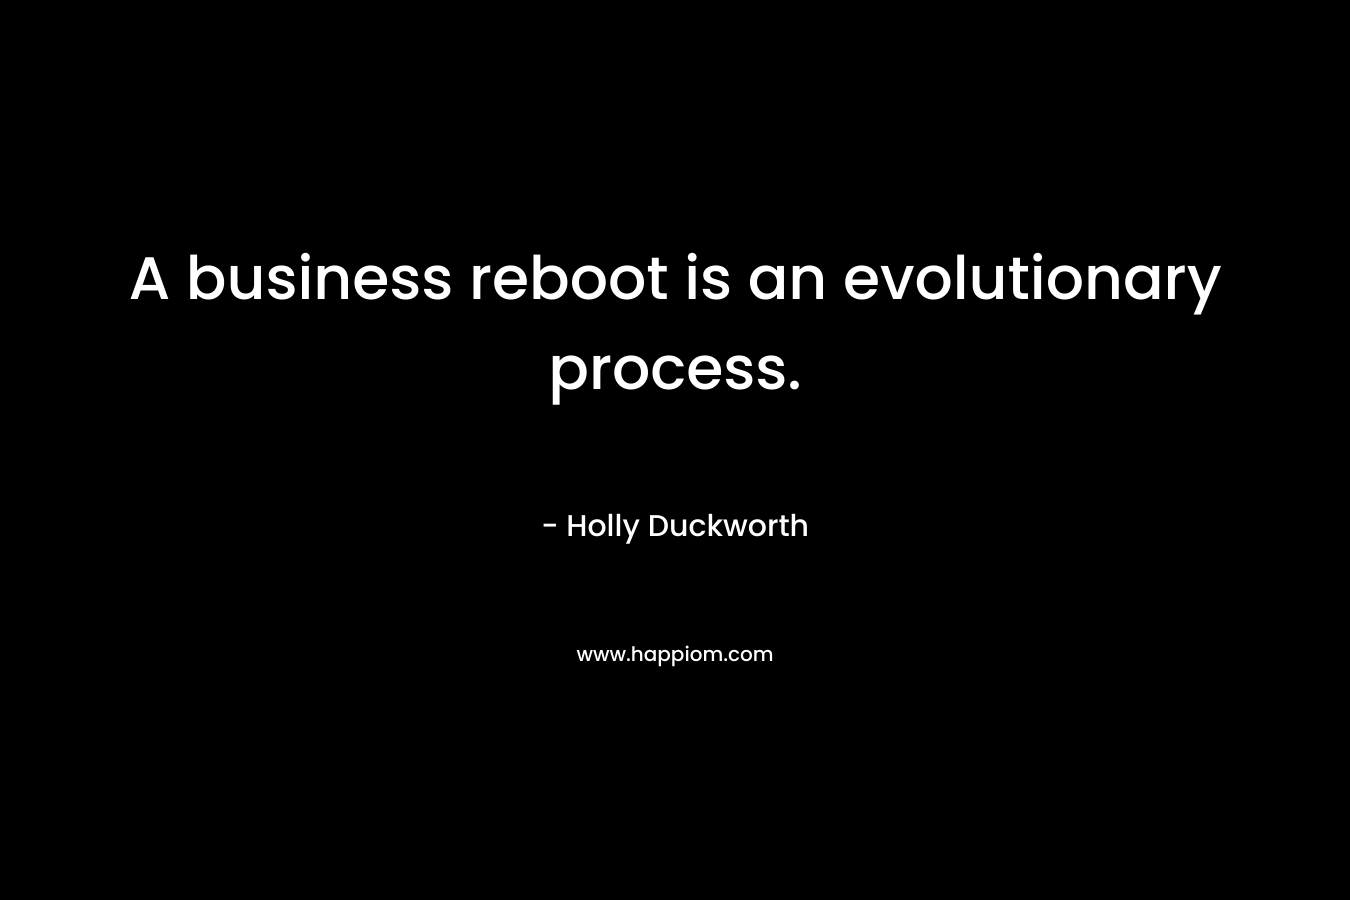 A business reboot is an evolutionary process. – Holly Duckworth